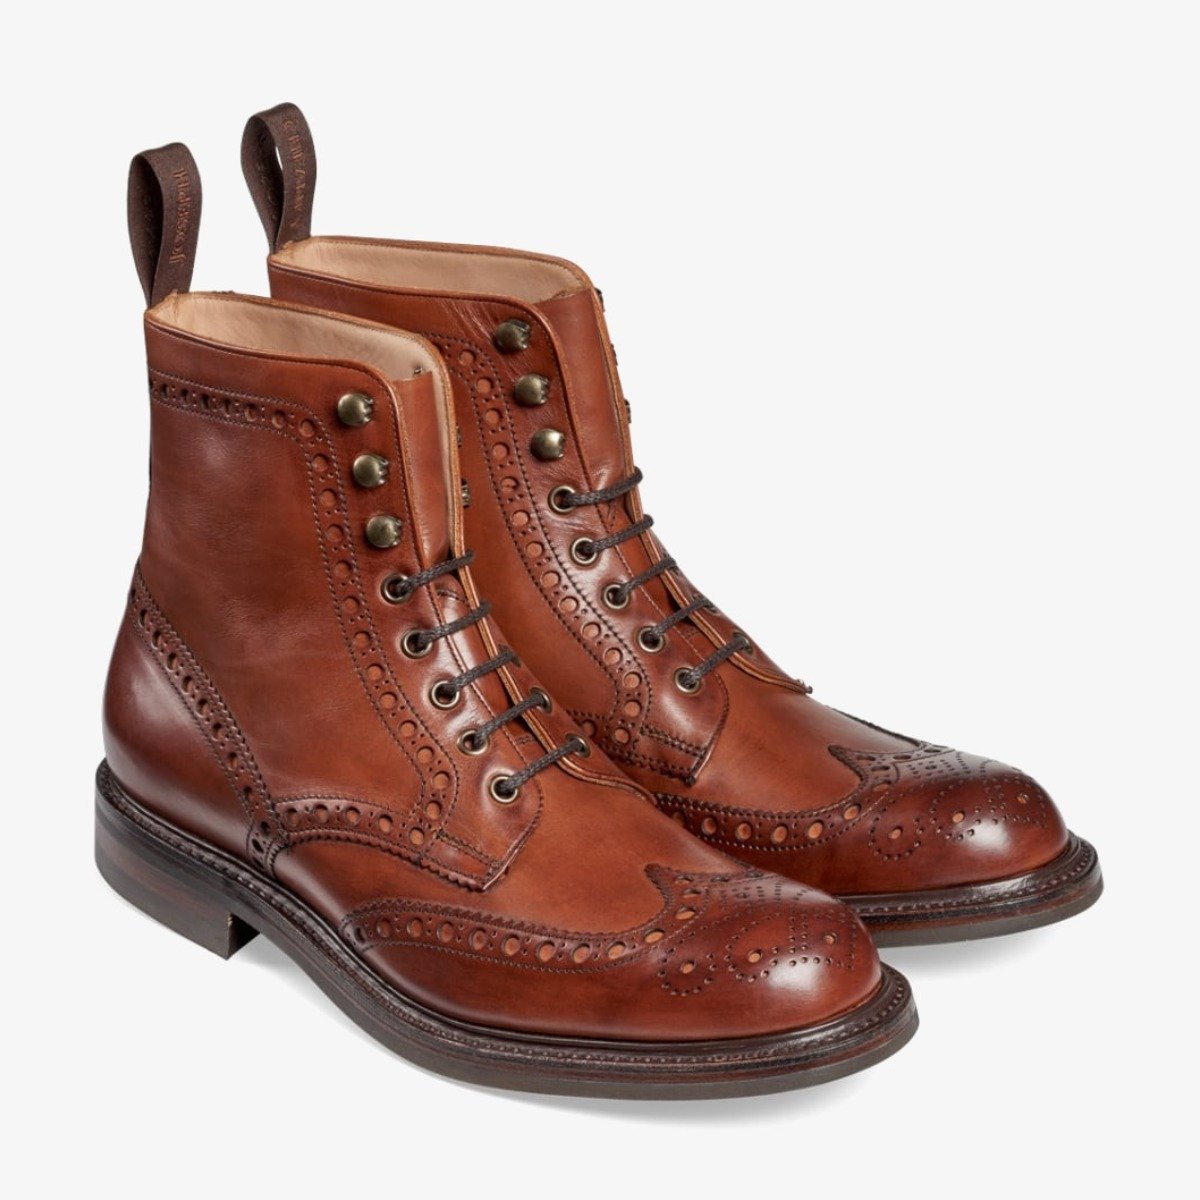 Cheaney Tweed dark leaf brogue lace up boots